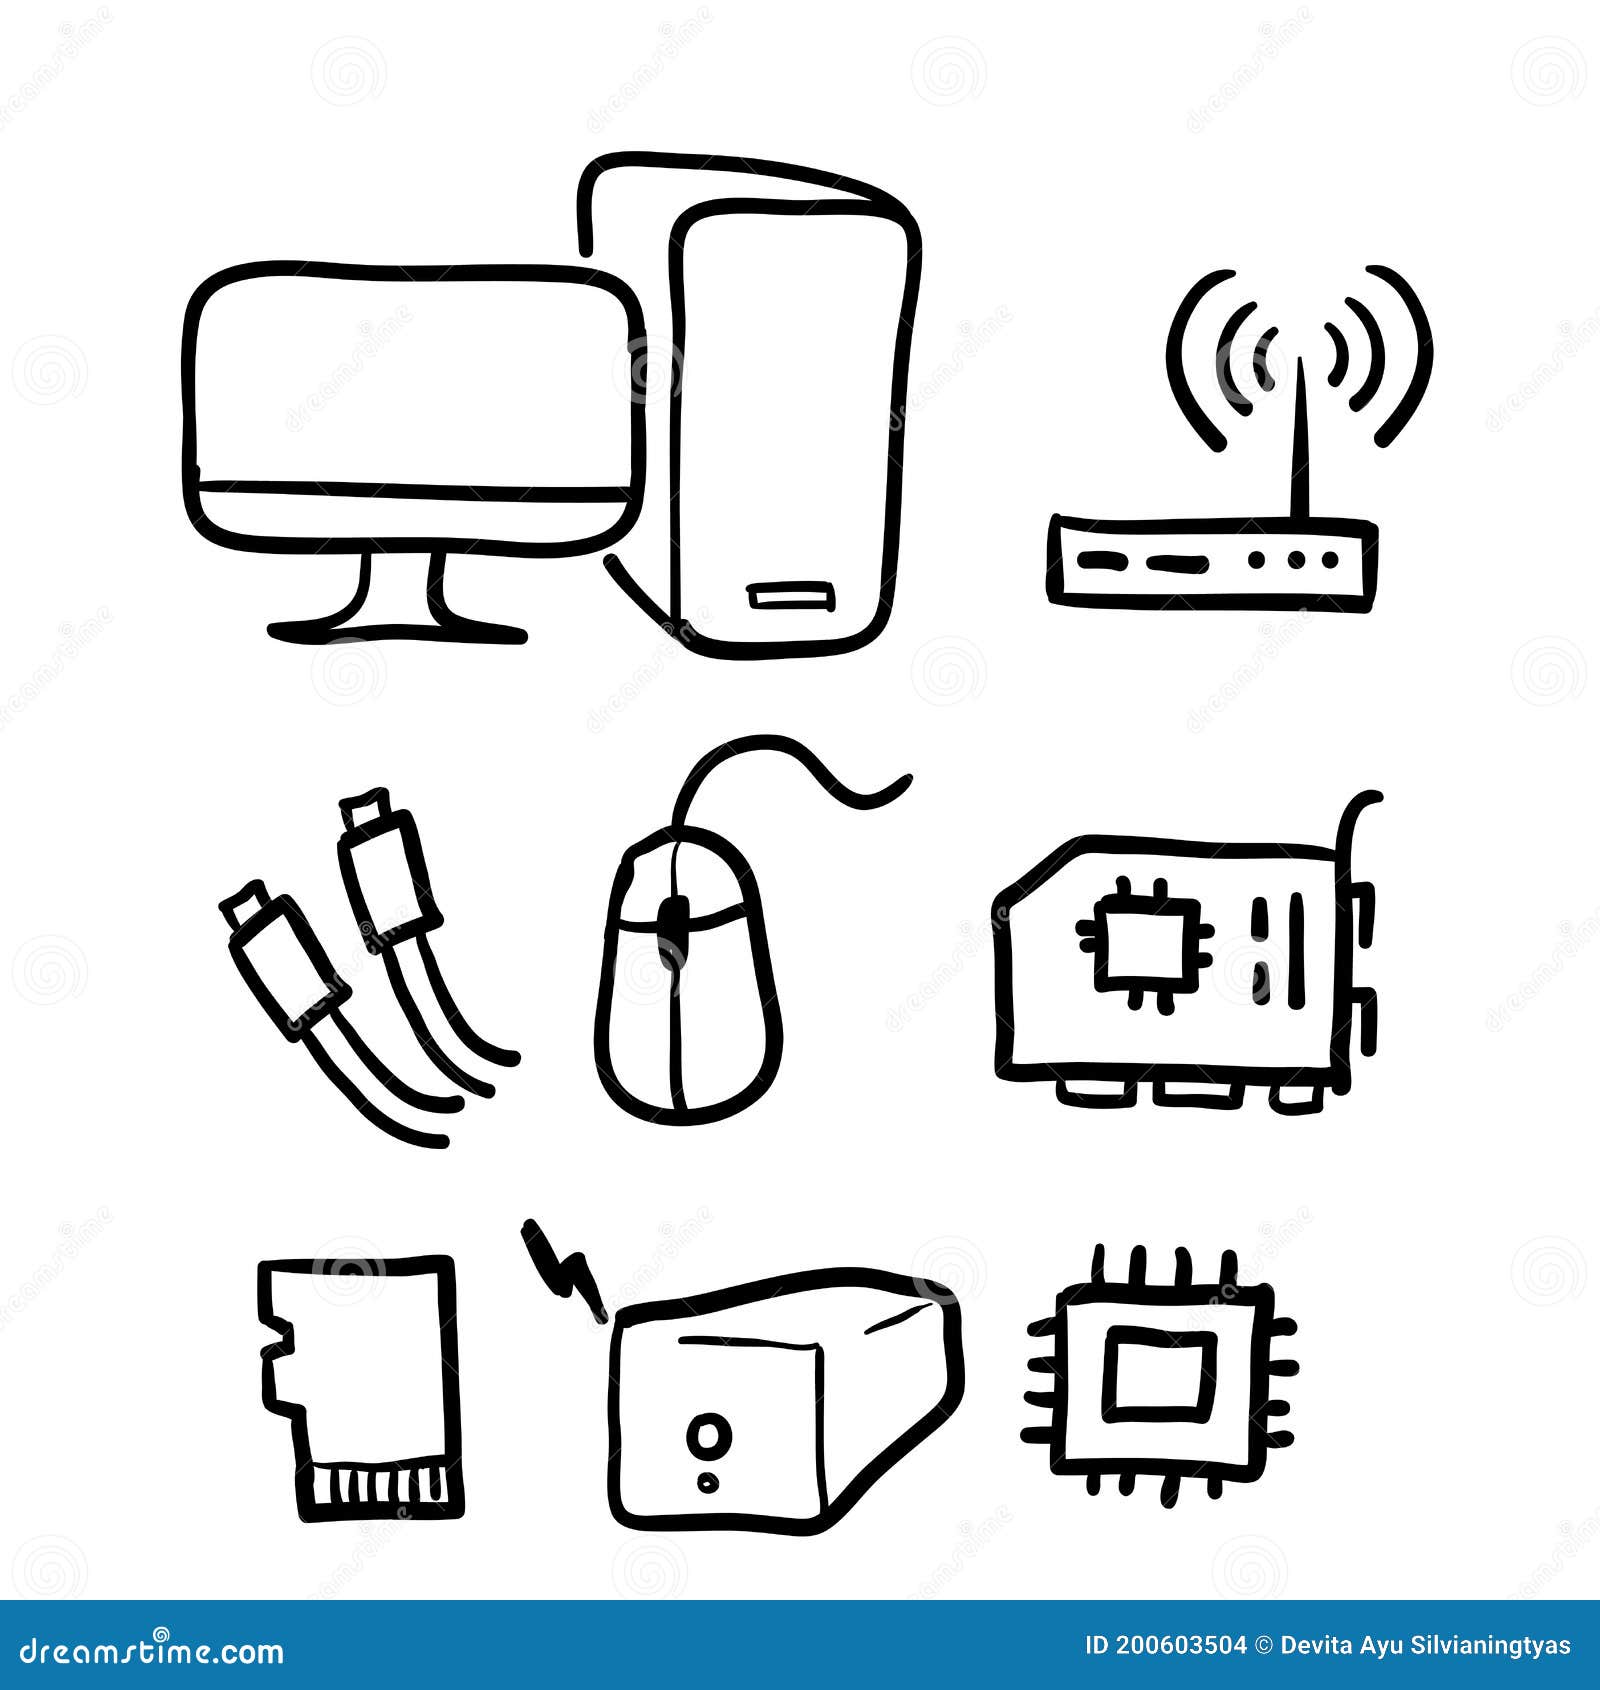 Computer and Electronic Gadget Hand Drawn Clipart Set, High Res, JPG, PNG  and Vector Formats - Etsy Canada | Computer drawing, Electronics gadgets,  Best buy geek squad